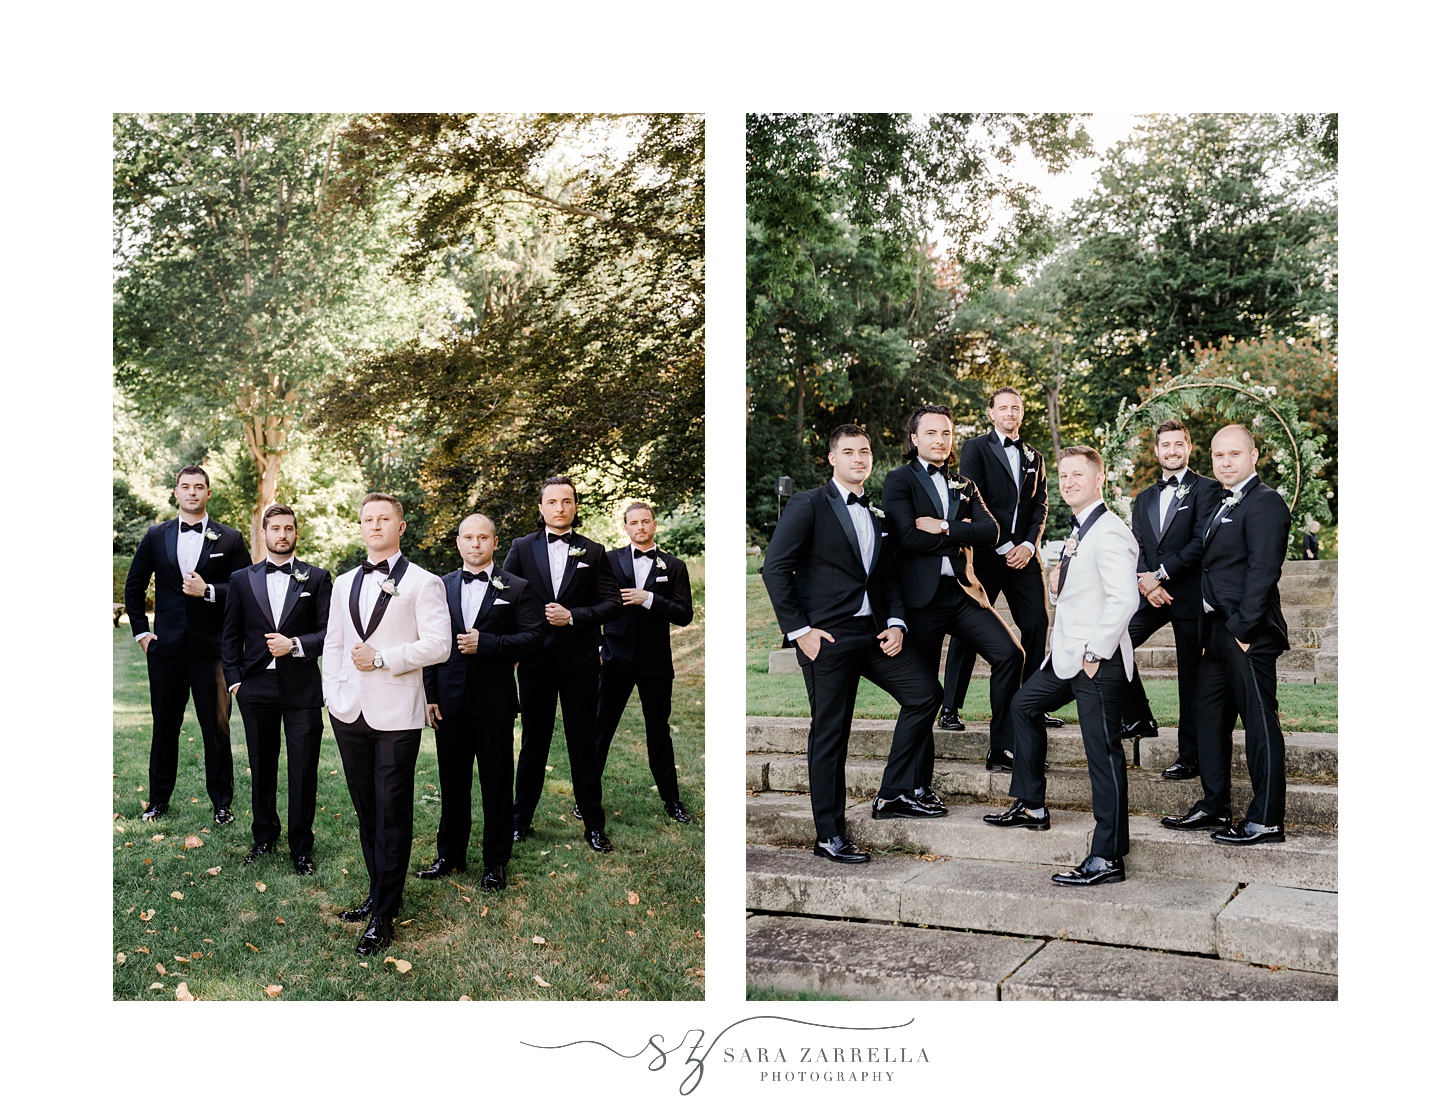 groom poses with groomsmen in classic tuxes on stone steps at Glen Manor House